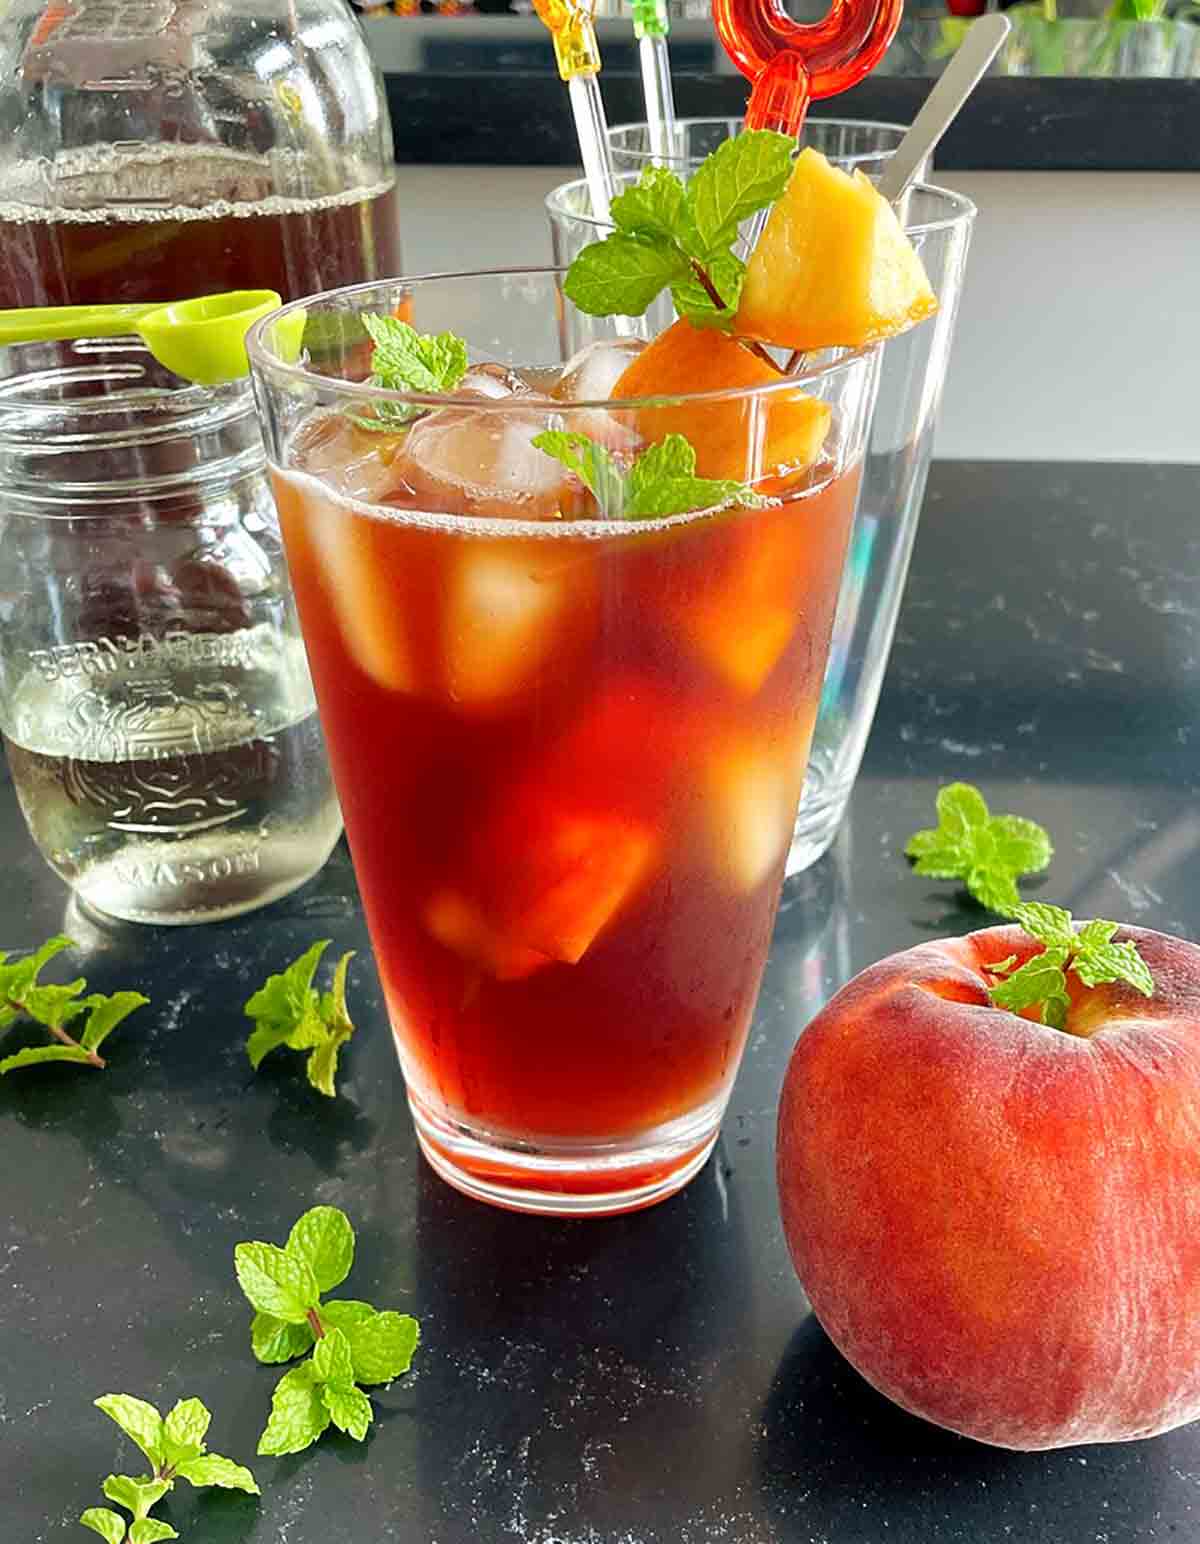 A glass of peach iced tea with min springs and a peach on the side.